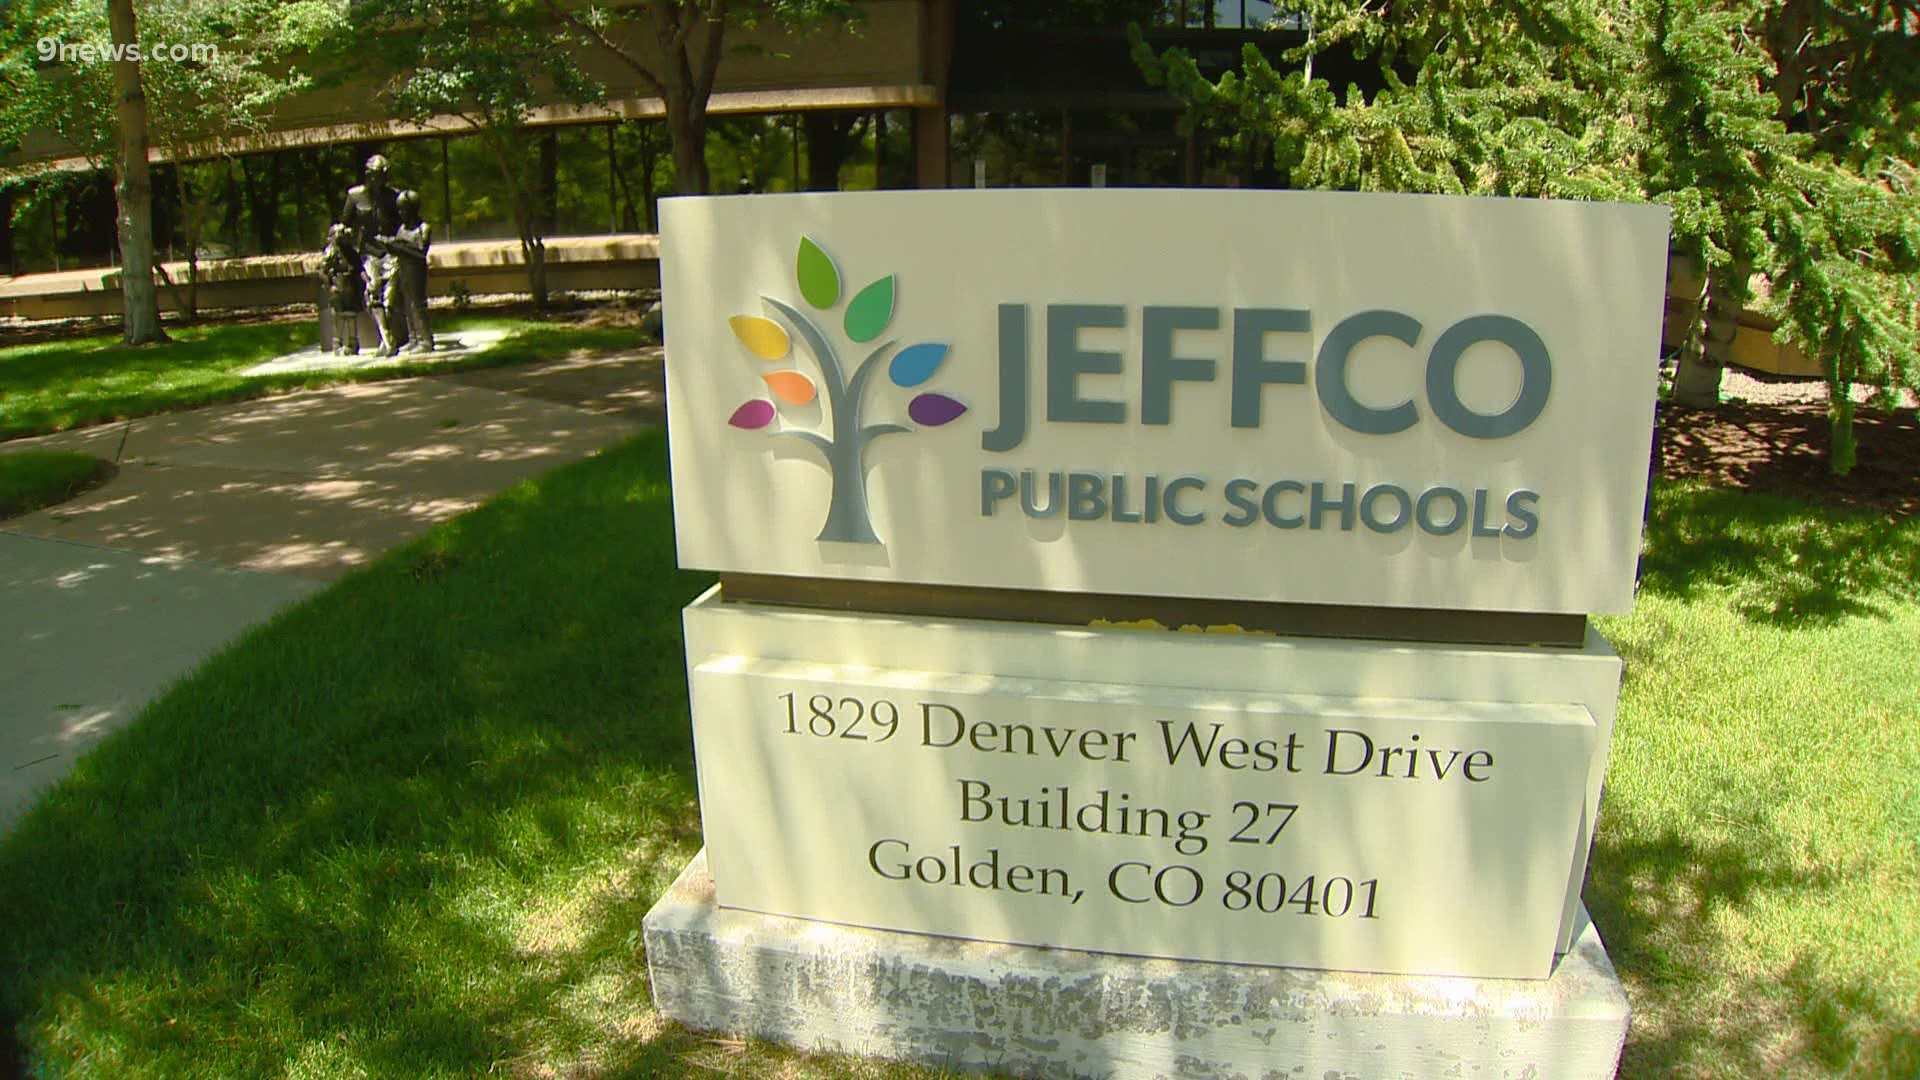 Dougco Superintendent Thomas Tucker resigned on Tuesday JeffCo Schools Superintendent Jason Glass leavs in a few days.